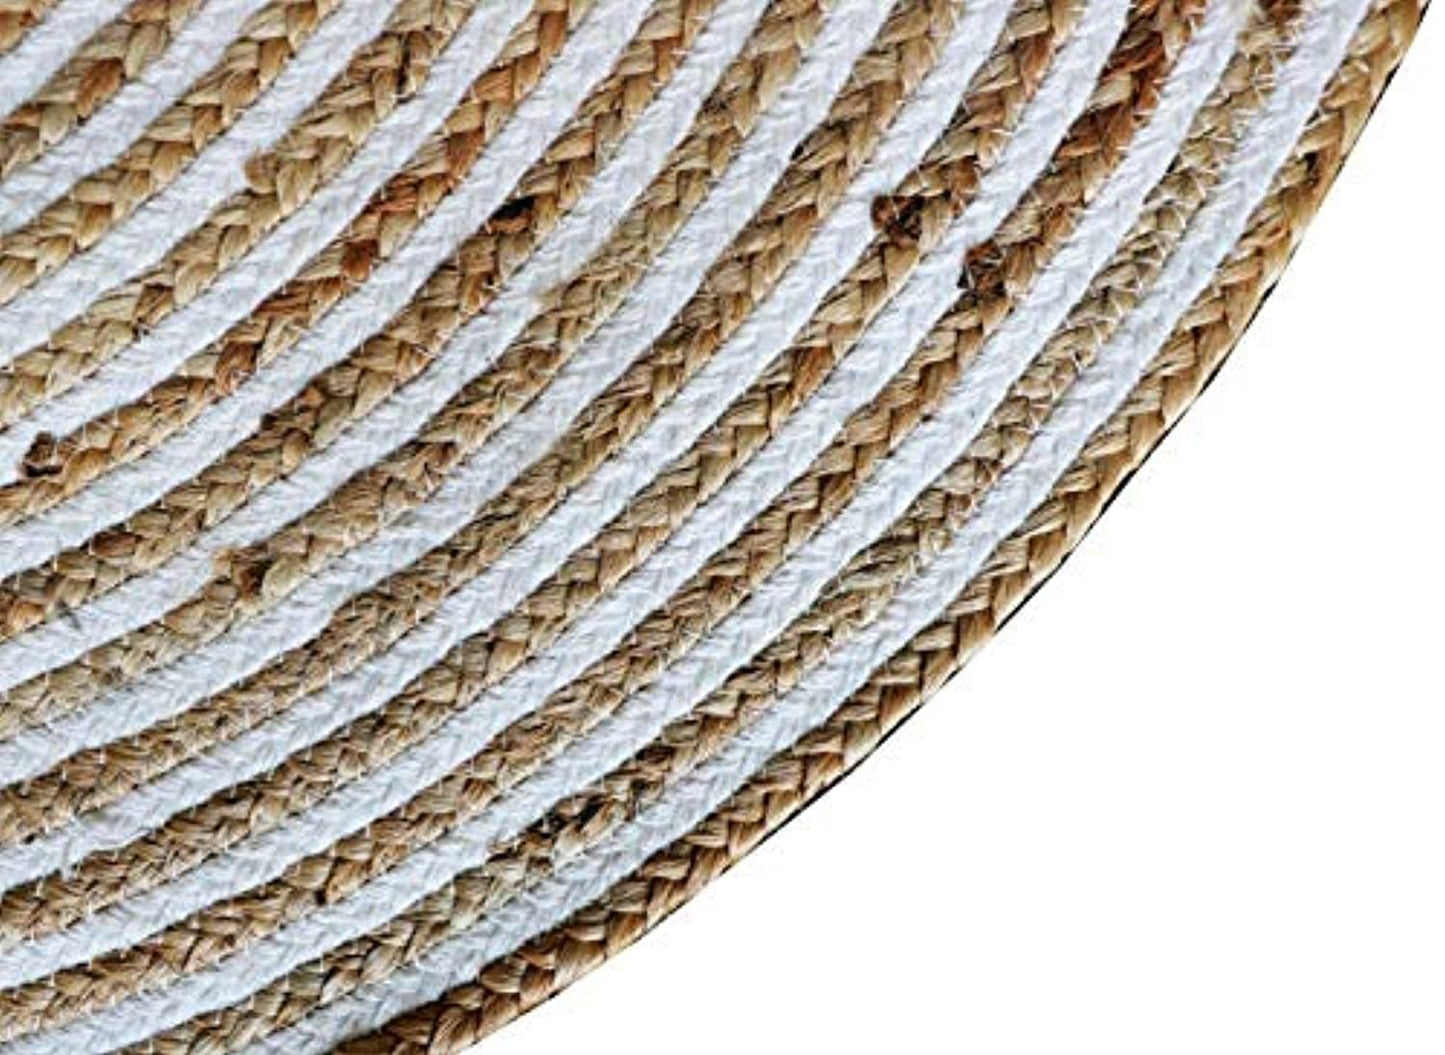 Round Braided Jute Placemats